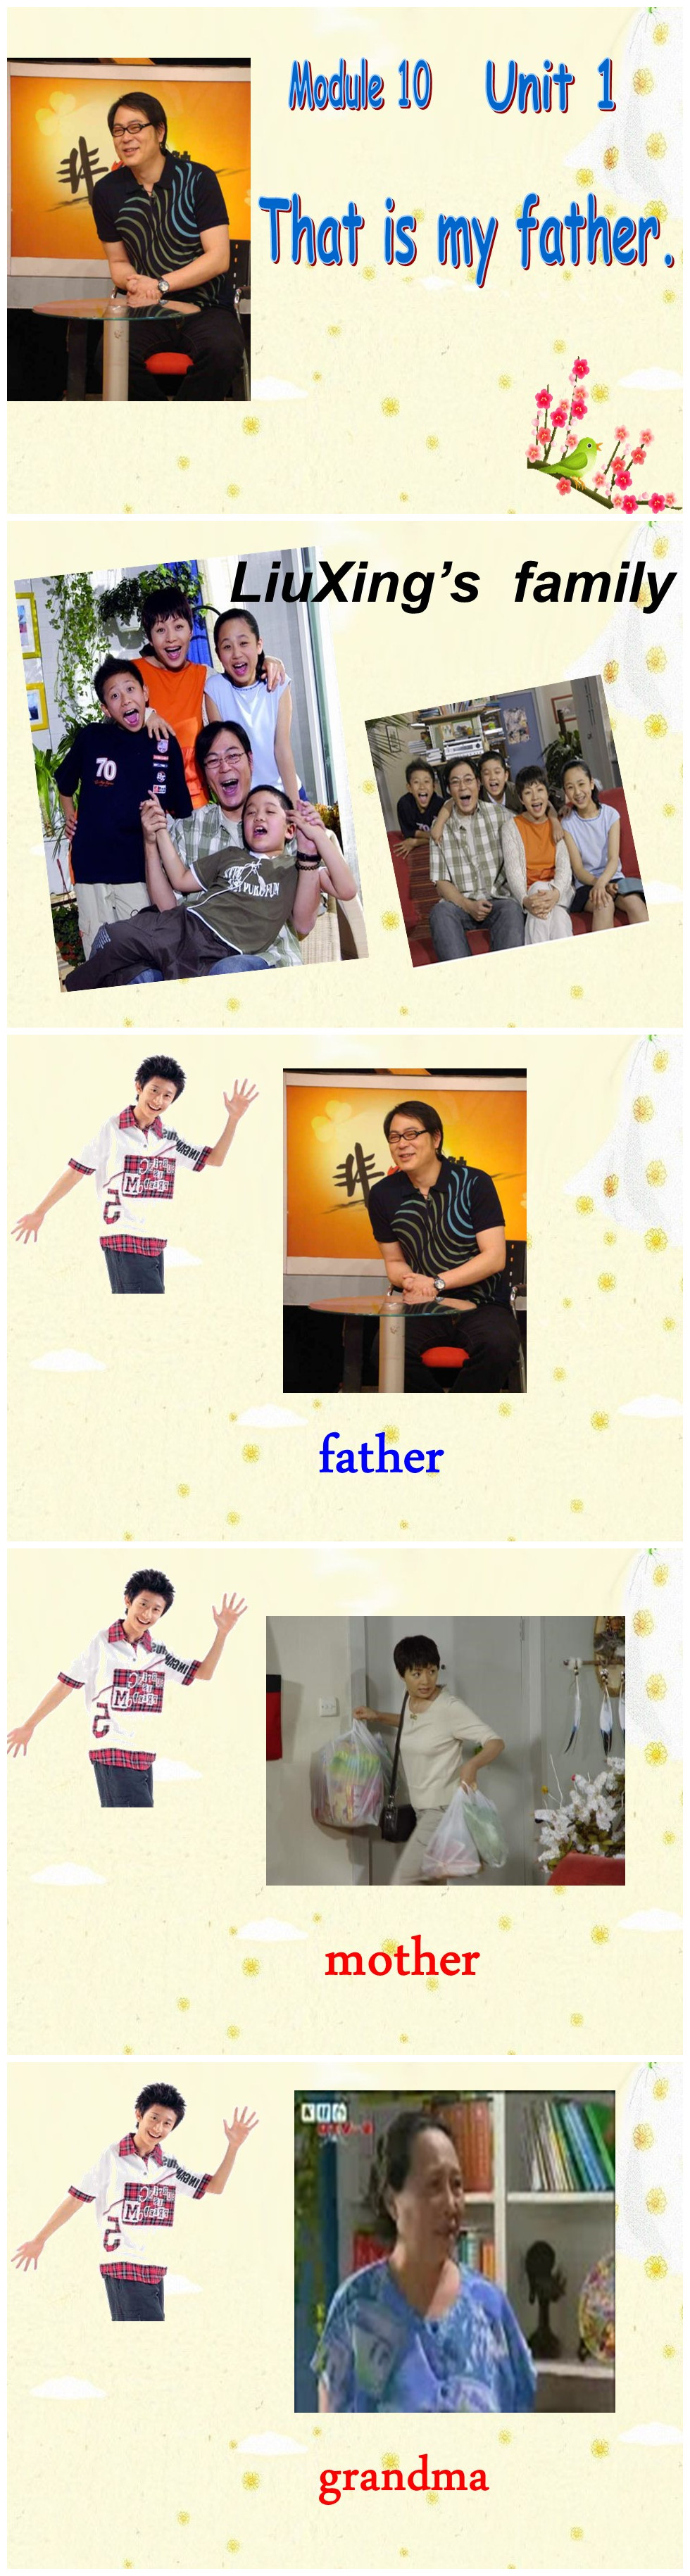 《That is my father》PPT课件2PPT课件下载